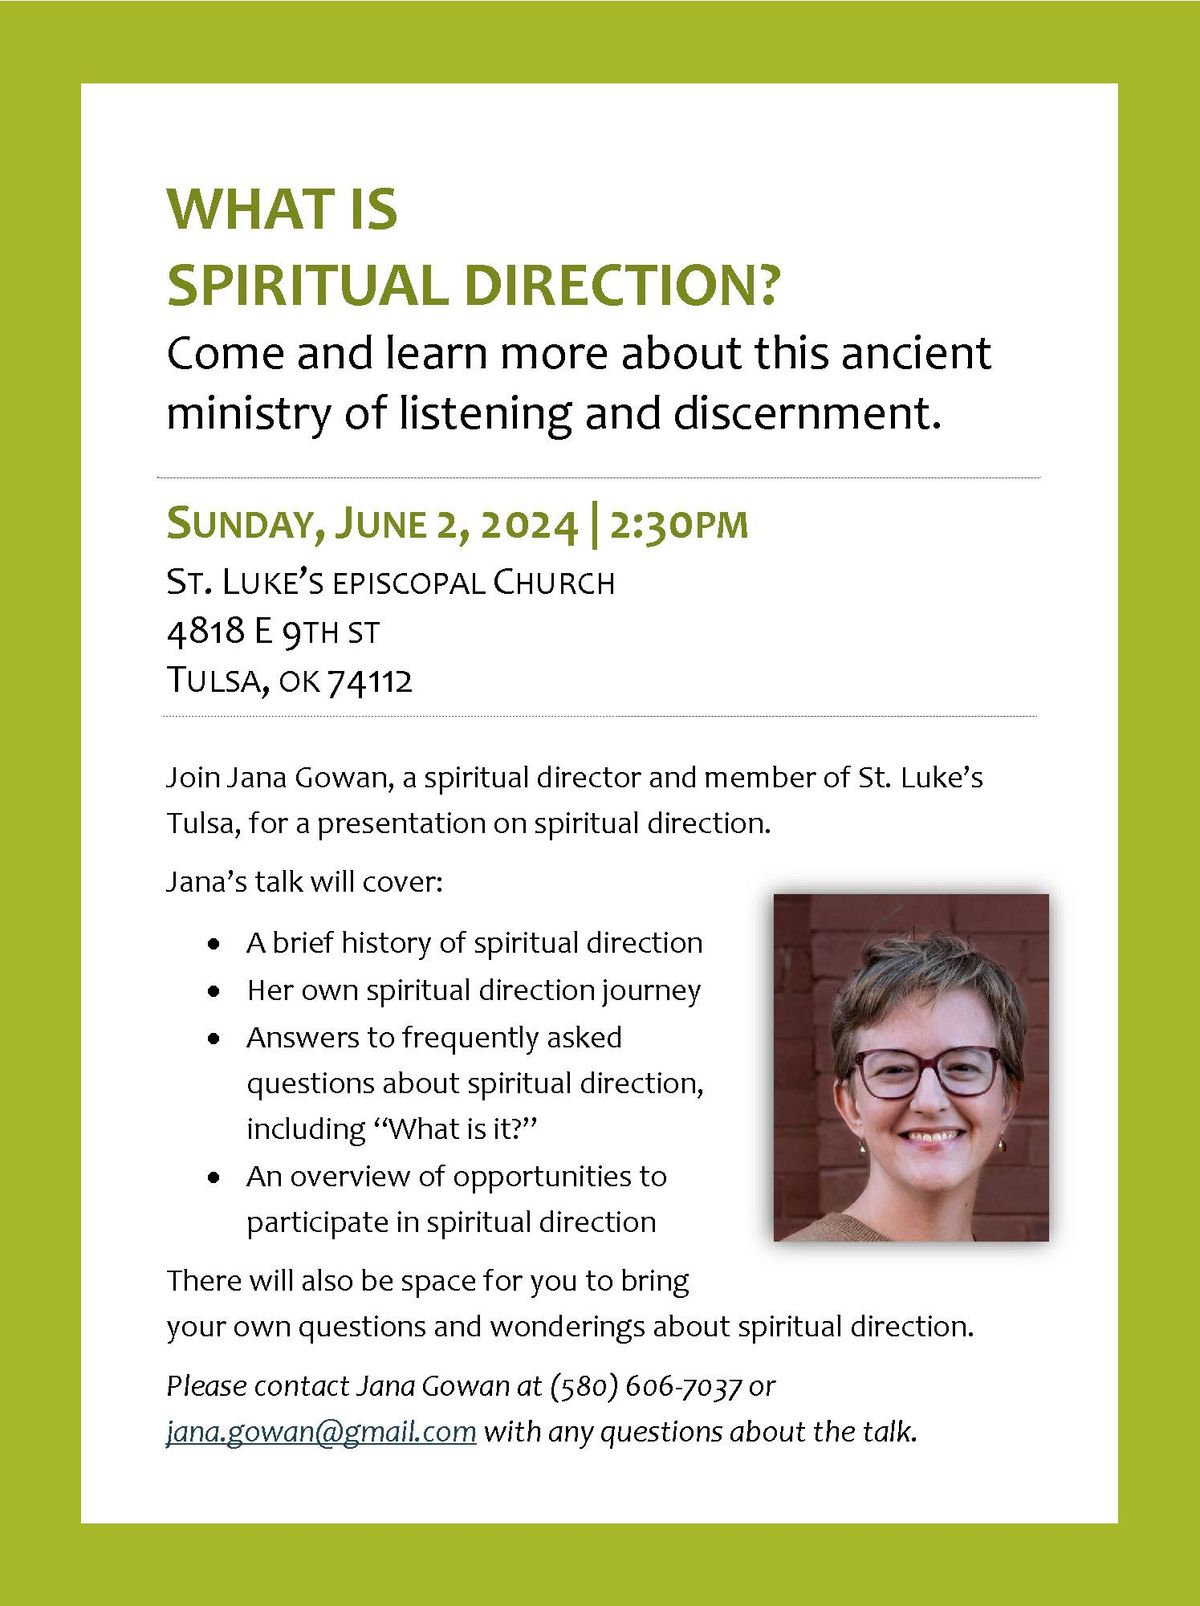 What is spiritual direction?